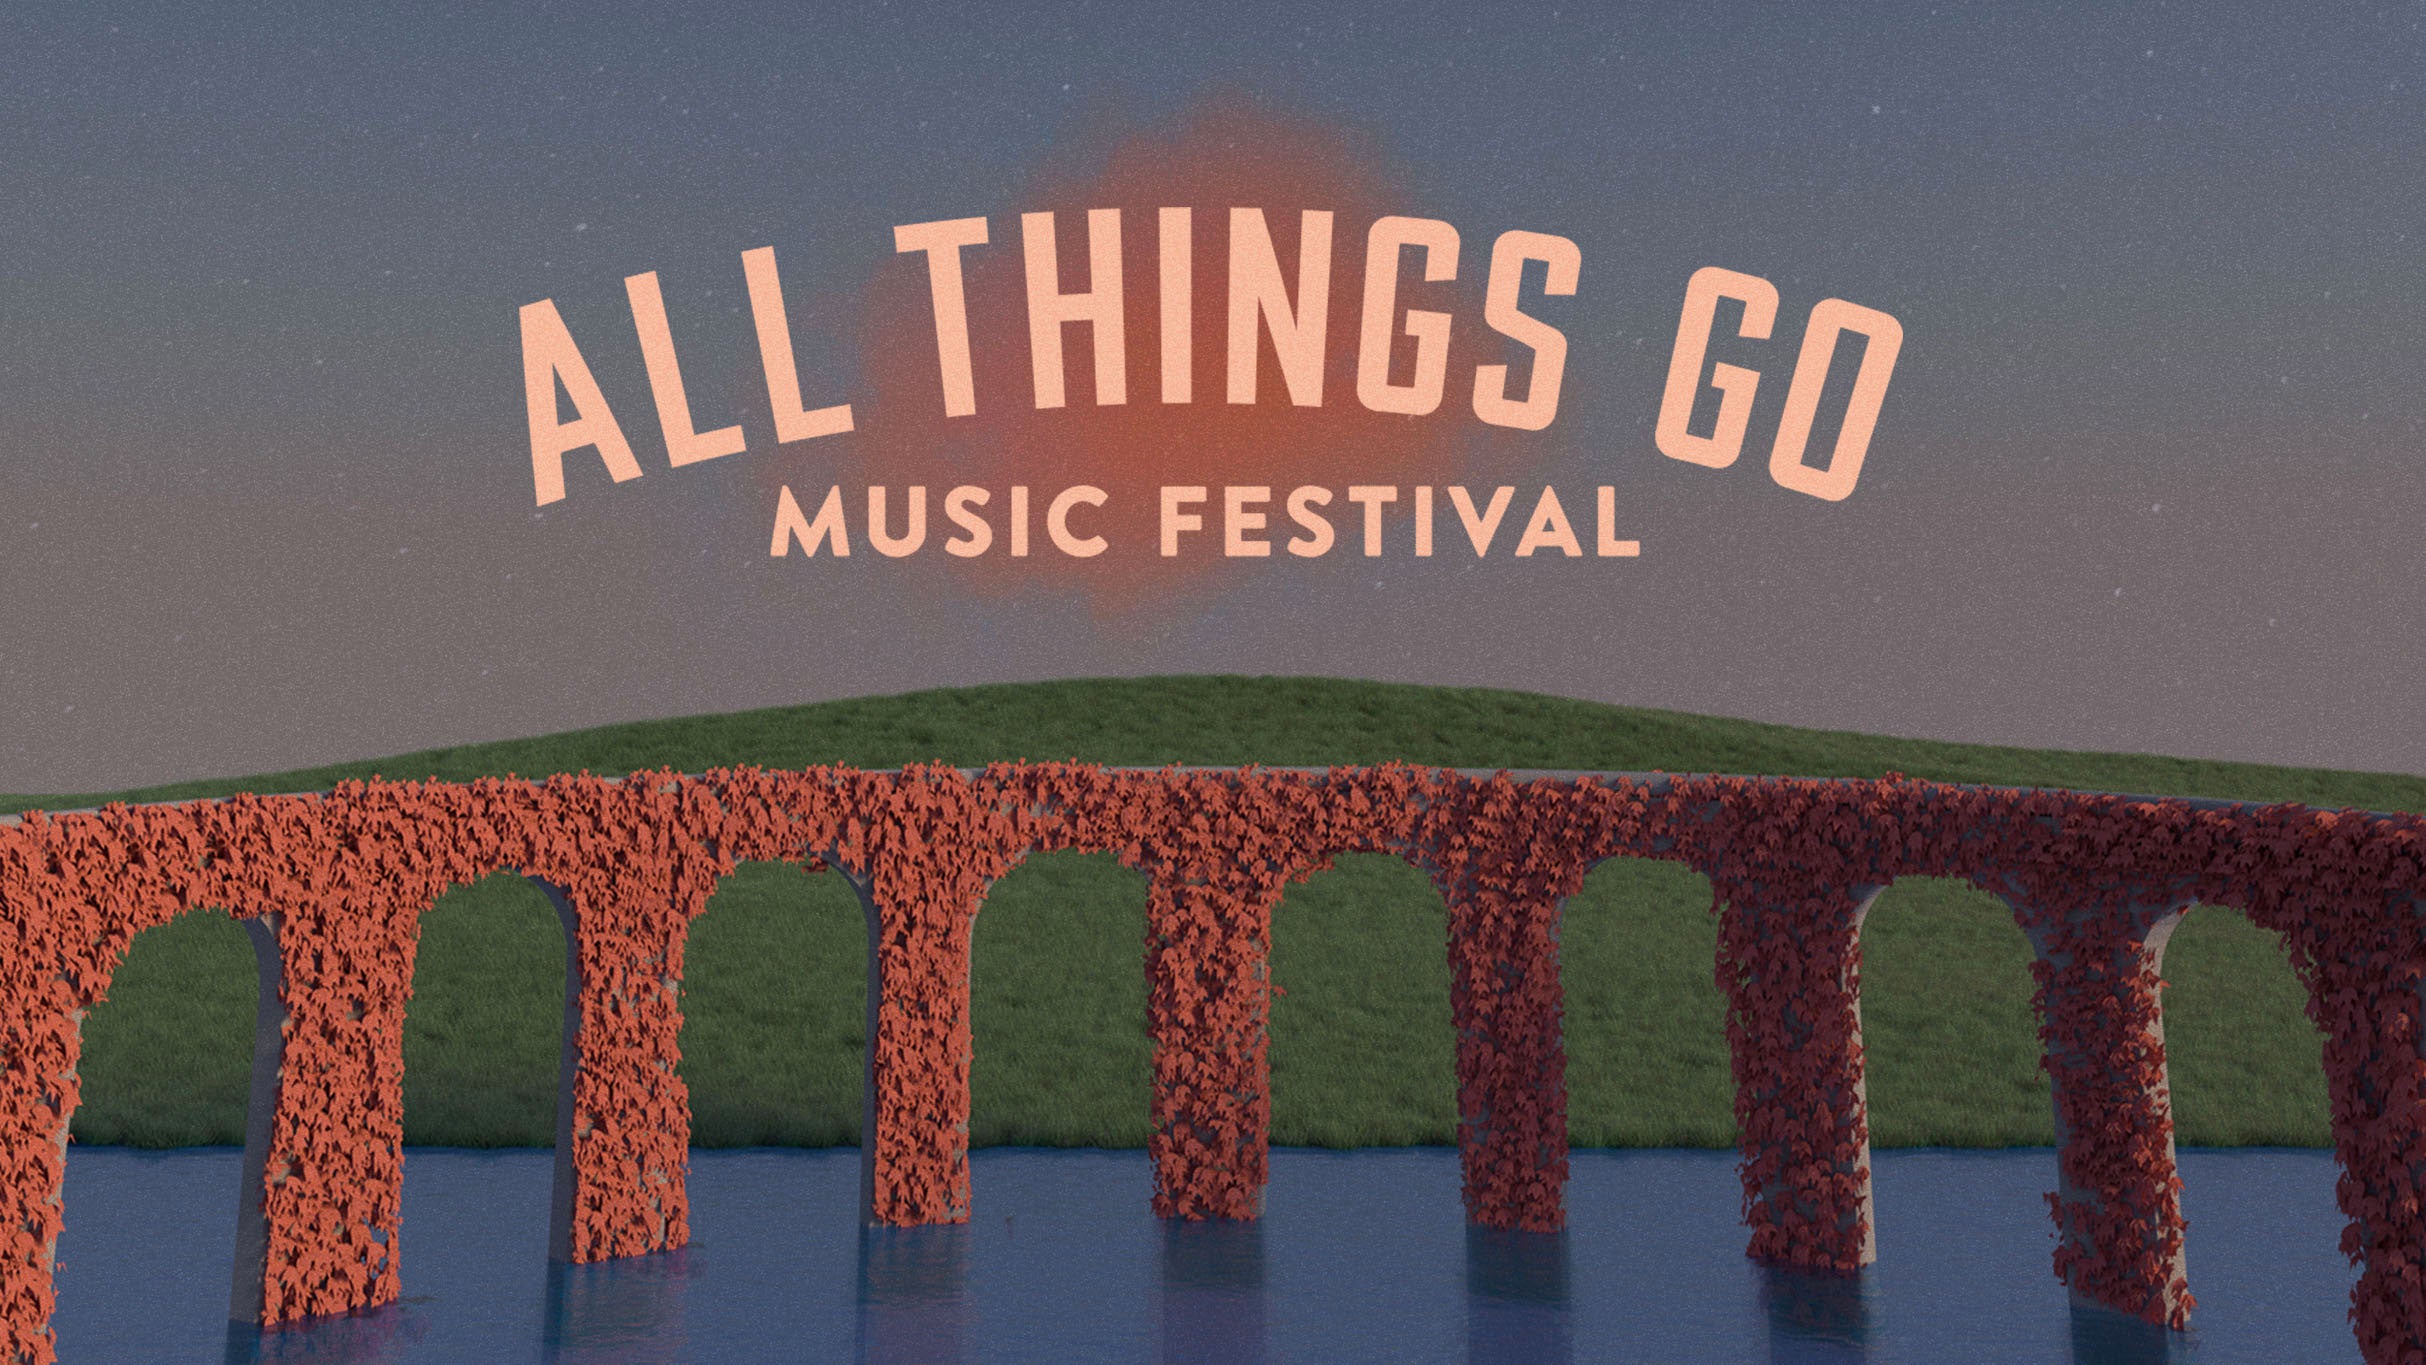 All Things Go Music Festival 2-Day Pass in Columbia promo photo for Official Platinum Presle 1 presale offer code